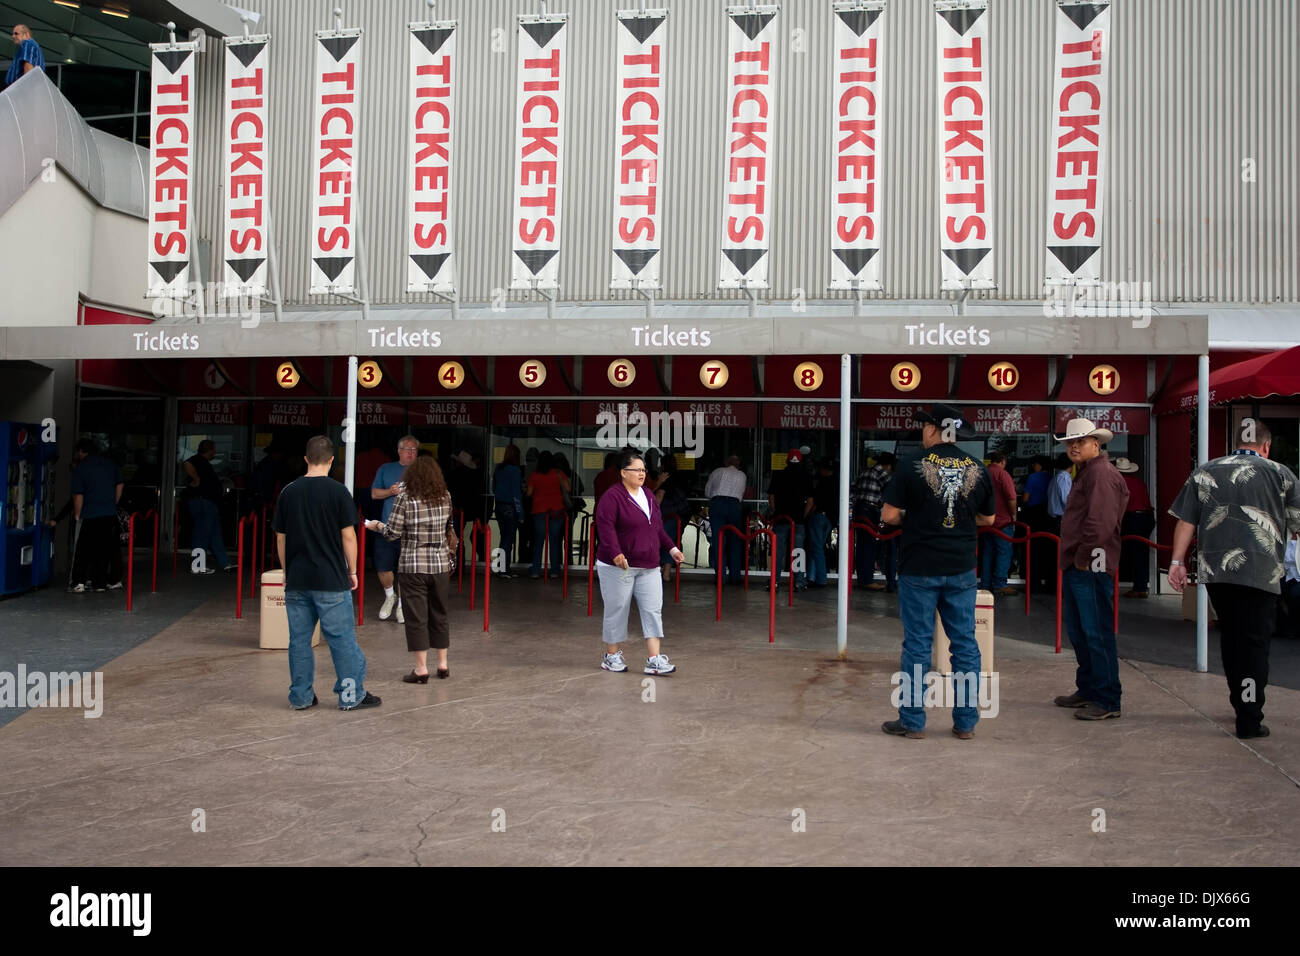 Oct. 24, 2010 - Las Vegas, Nevada, United States of America - The crowd lining up for tickets for the 2010 Built Ford Tough PBR World Finals at the Thomas & Mack Center in Las Vegas, Nevada. (Credit Image: © Matt Gdowski/Southcreek Global/ZUMApress.com) Stock Photo